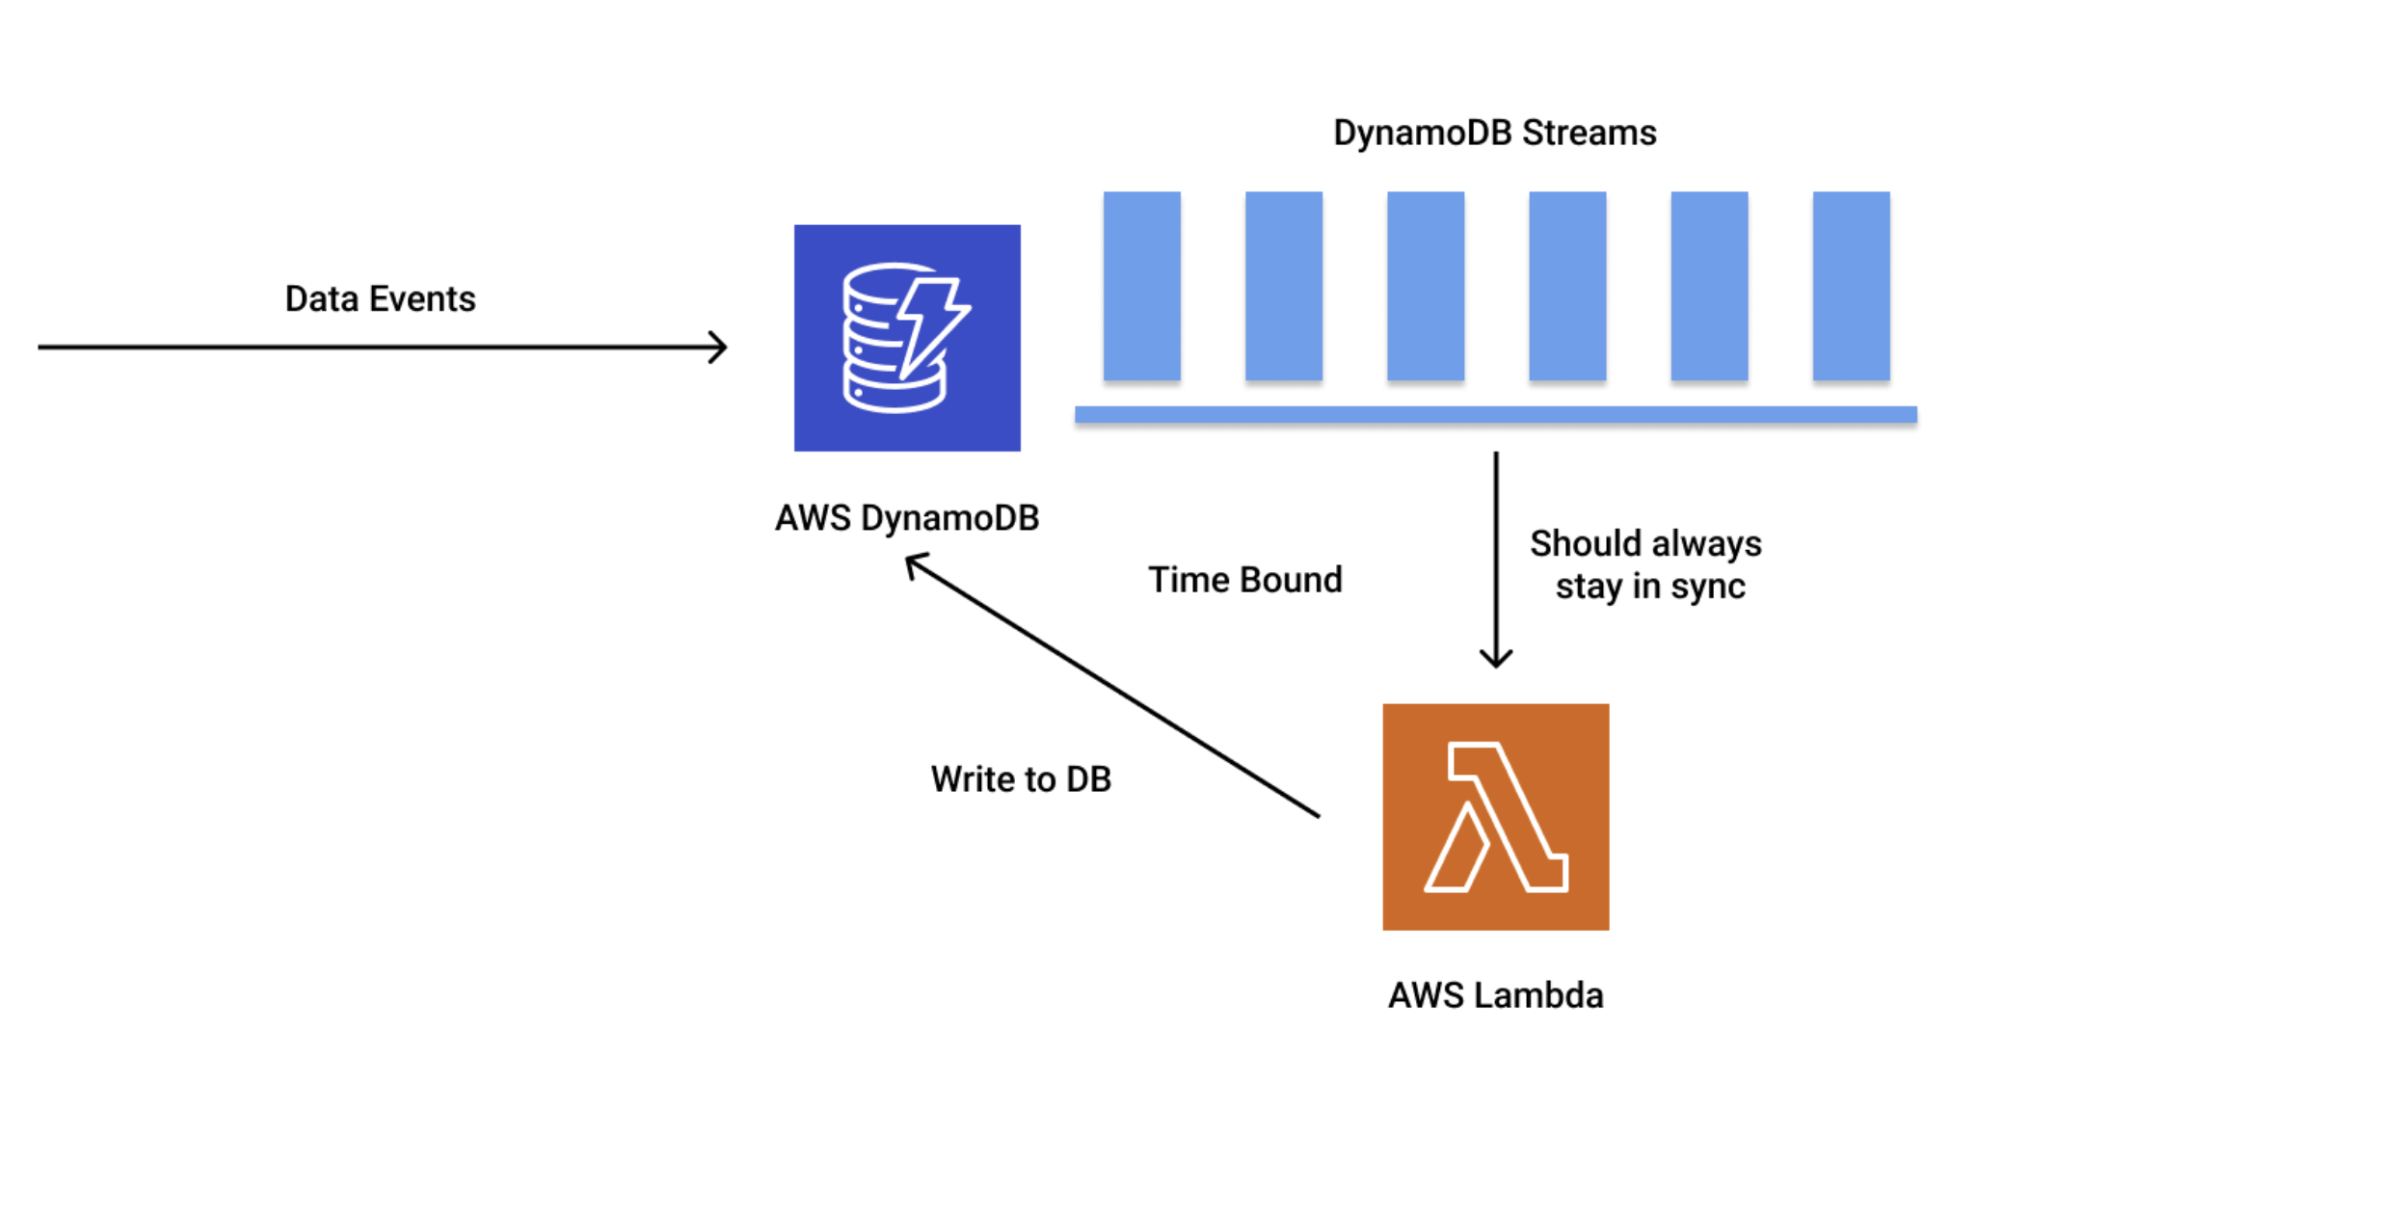 DynamoDB works along with AWS’s native Lambda functions to provide a serverless infrastructure